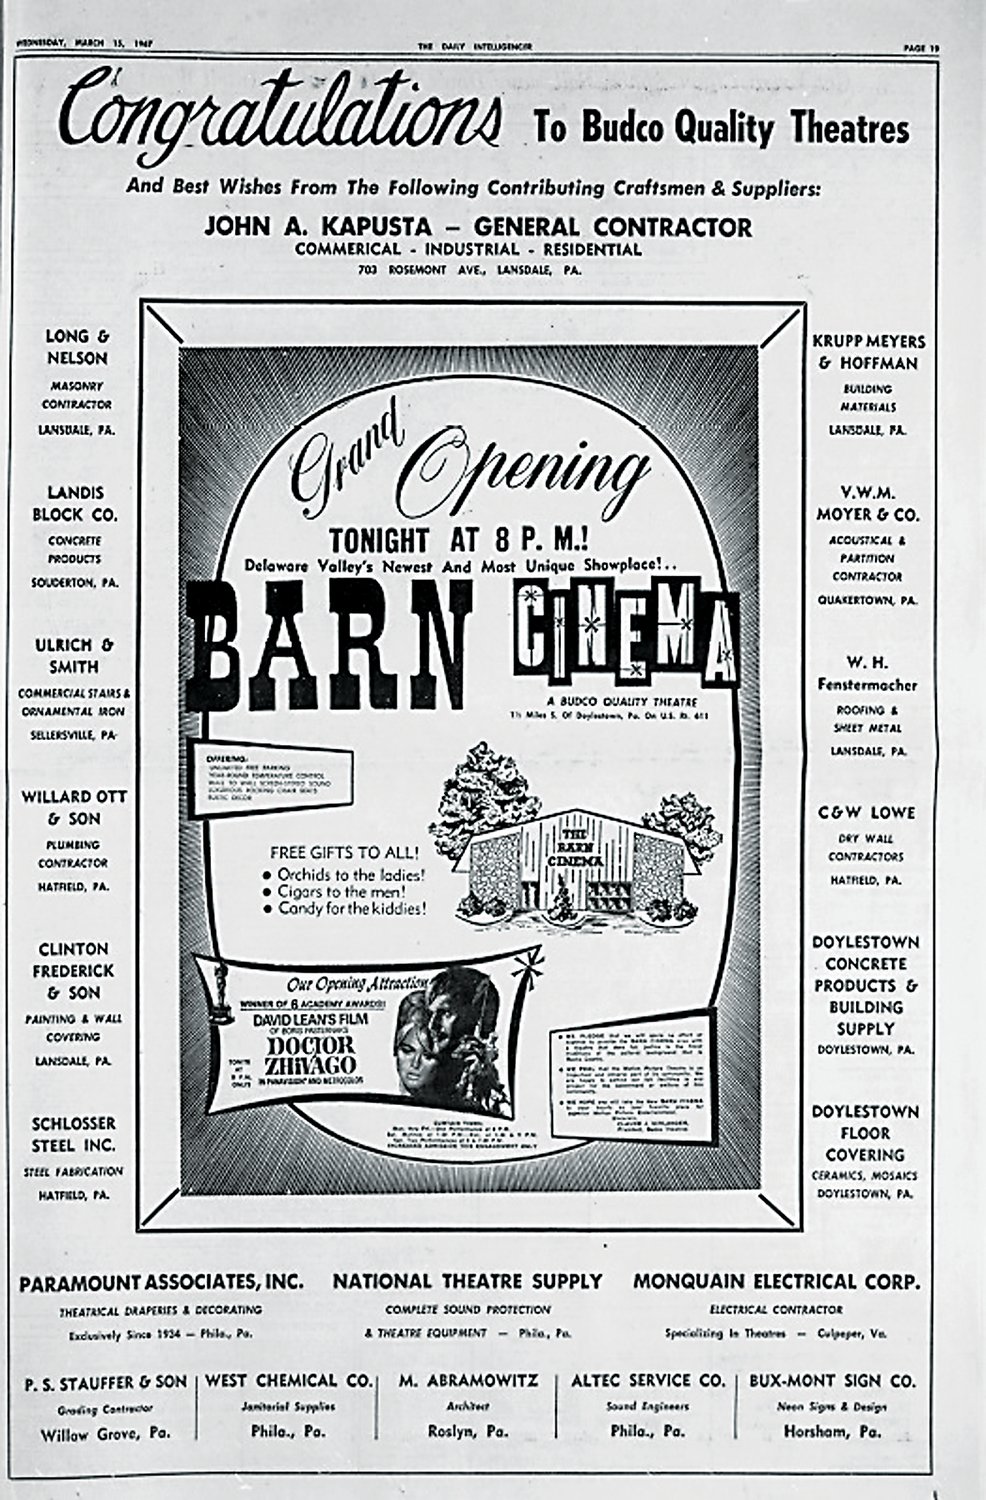 THE DOYLESTOWN HISTORICAL SOCIETY
A full page advertisement ran in The Doylestown Daily Intelligencer on March 15, 1967 to announce the grand opening of the Barn Cinema. It appeared on Page 19.